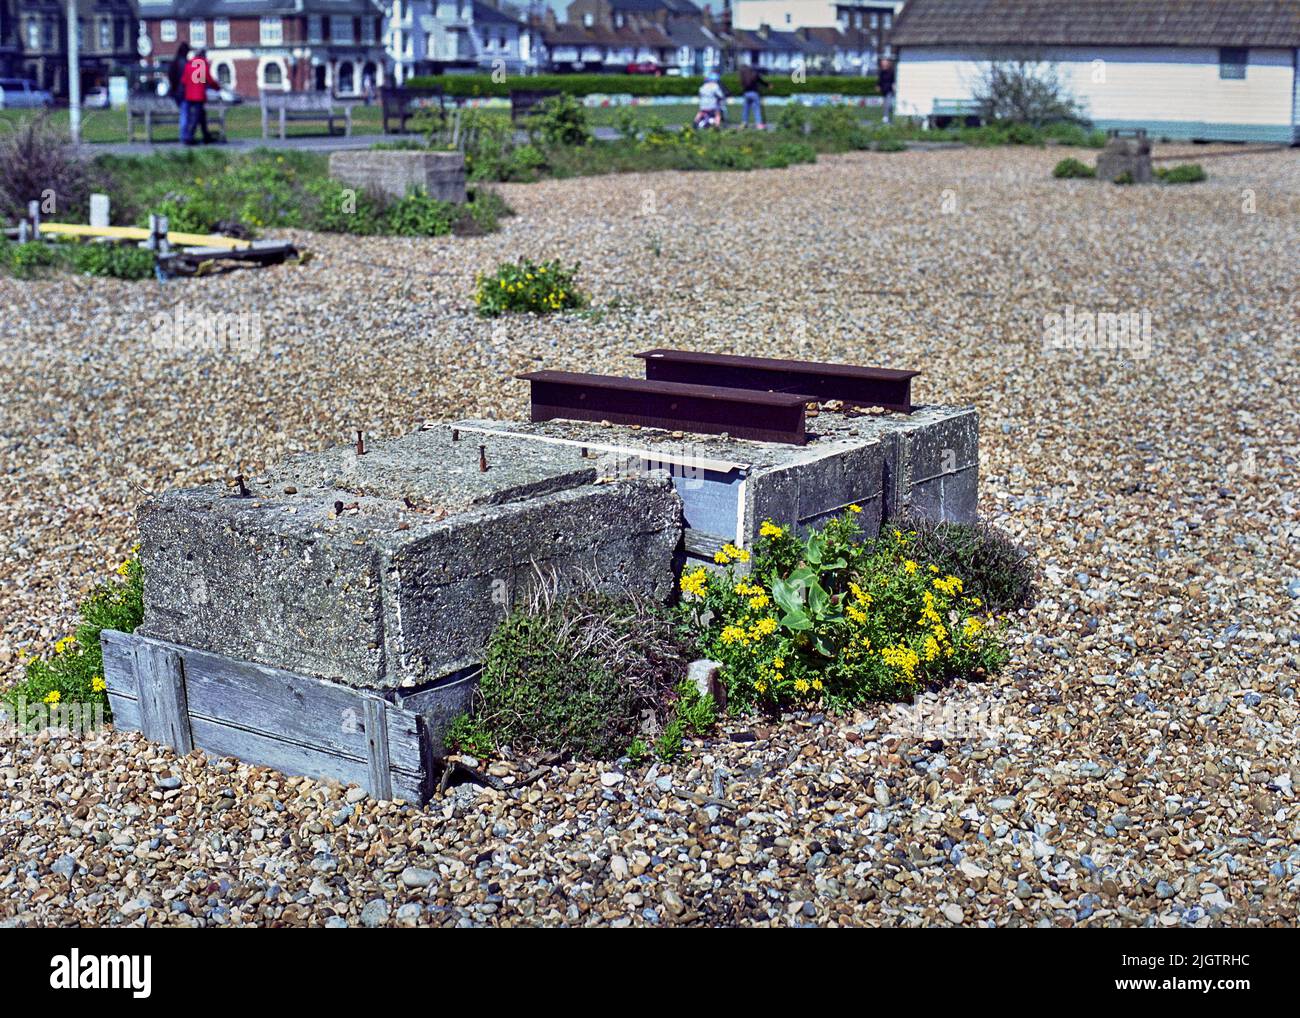 Working Beach, largely abandoned, in South-East Kent, UK. Much evidence left behind from what was a very busy fishing industry since the 18th Century. Stock Photo